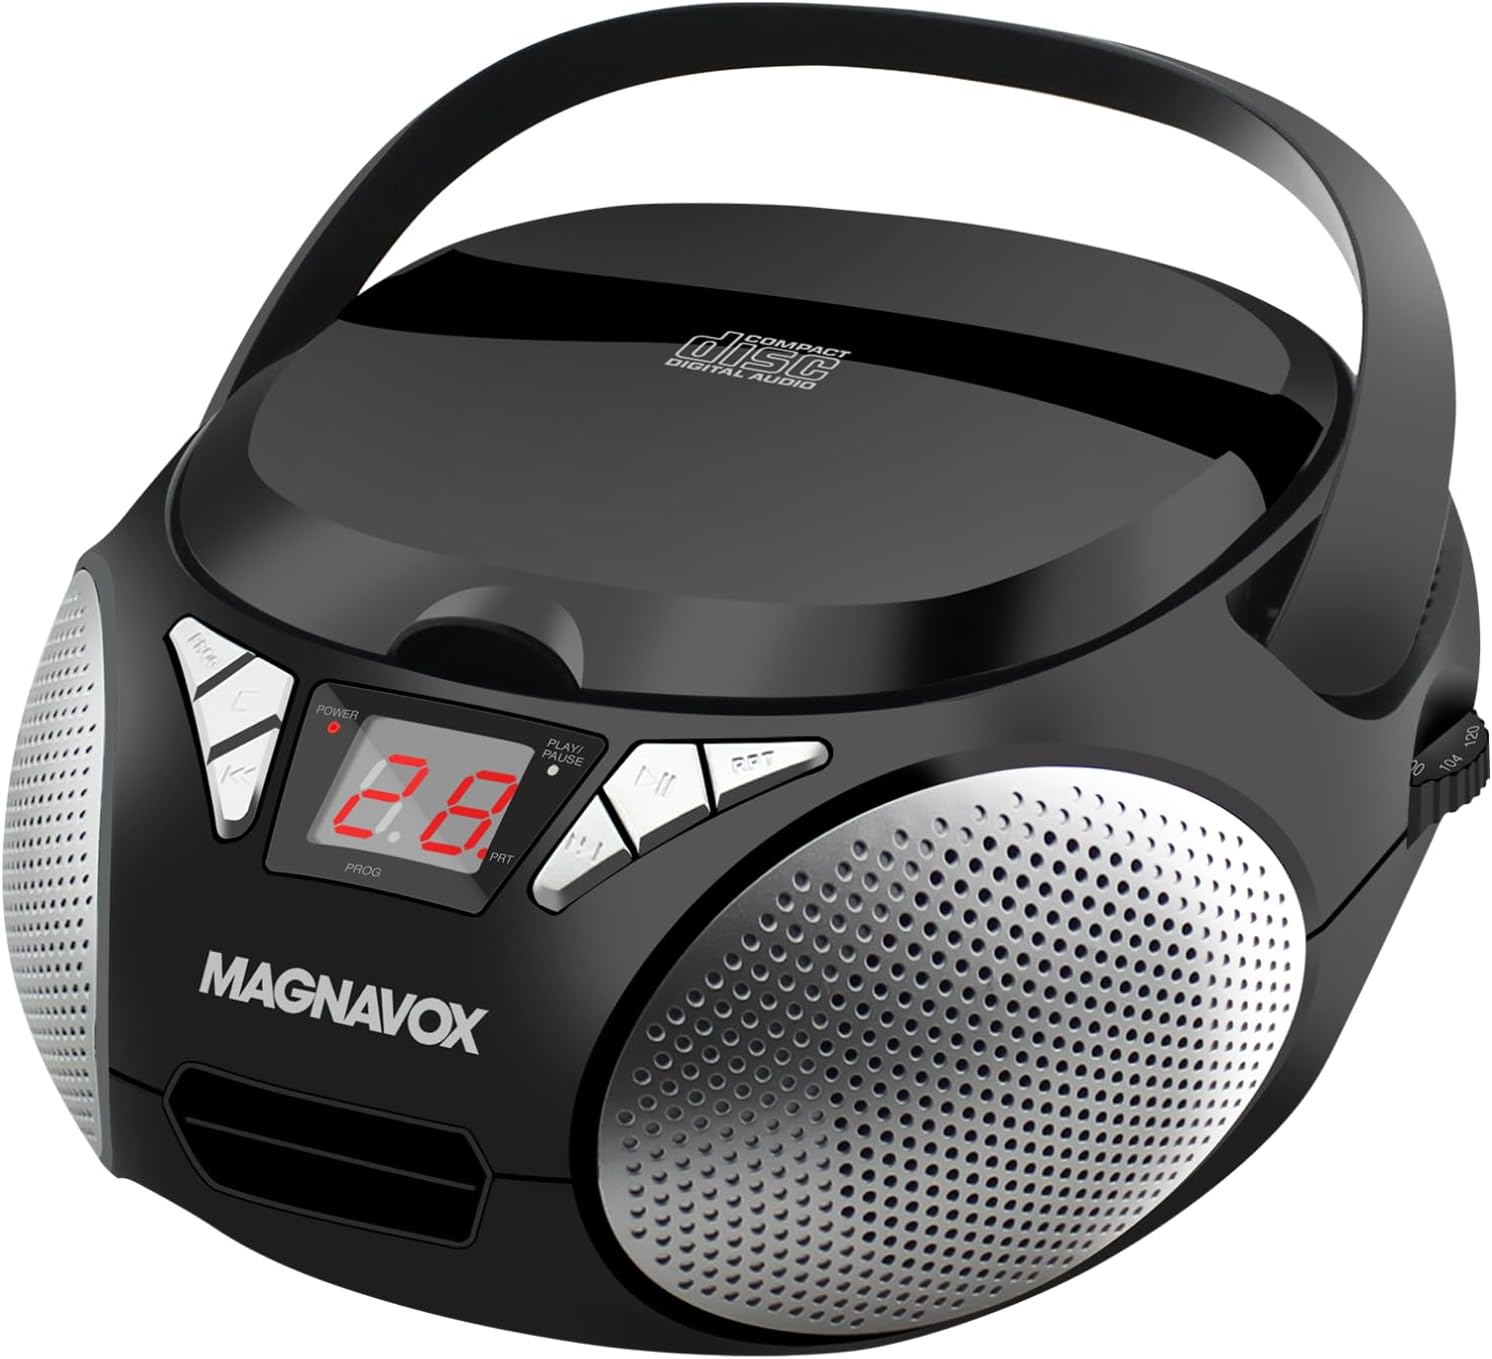 Magnavox MD6924 Portable Top Loading CD Boombox with AM/FM Stereo Radio in Black